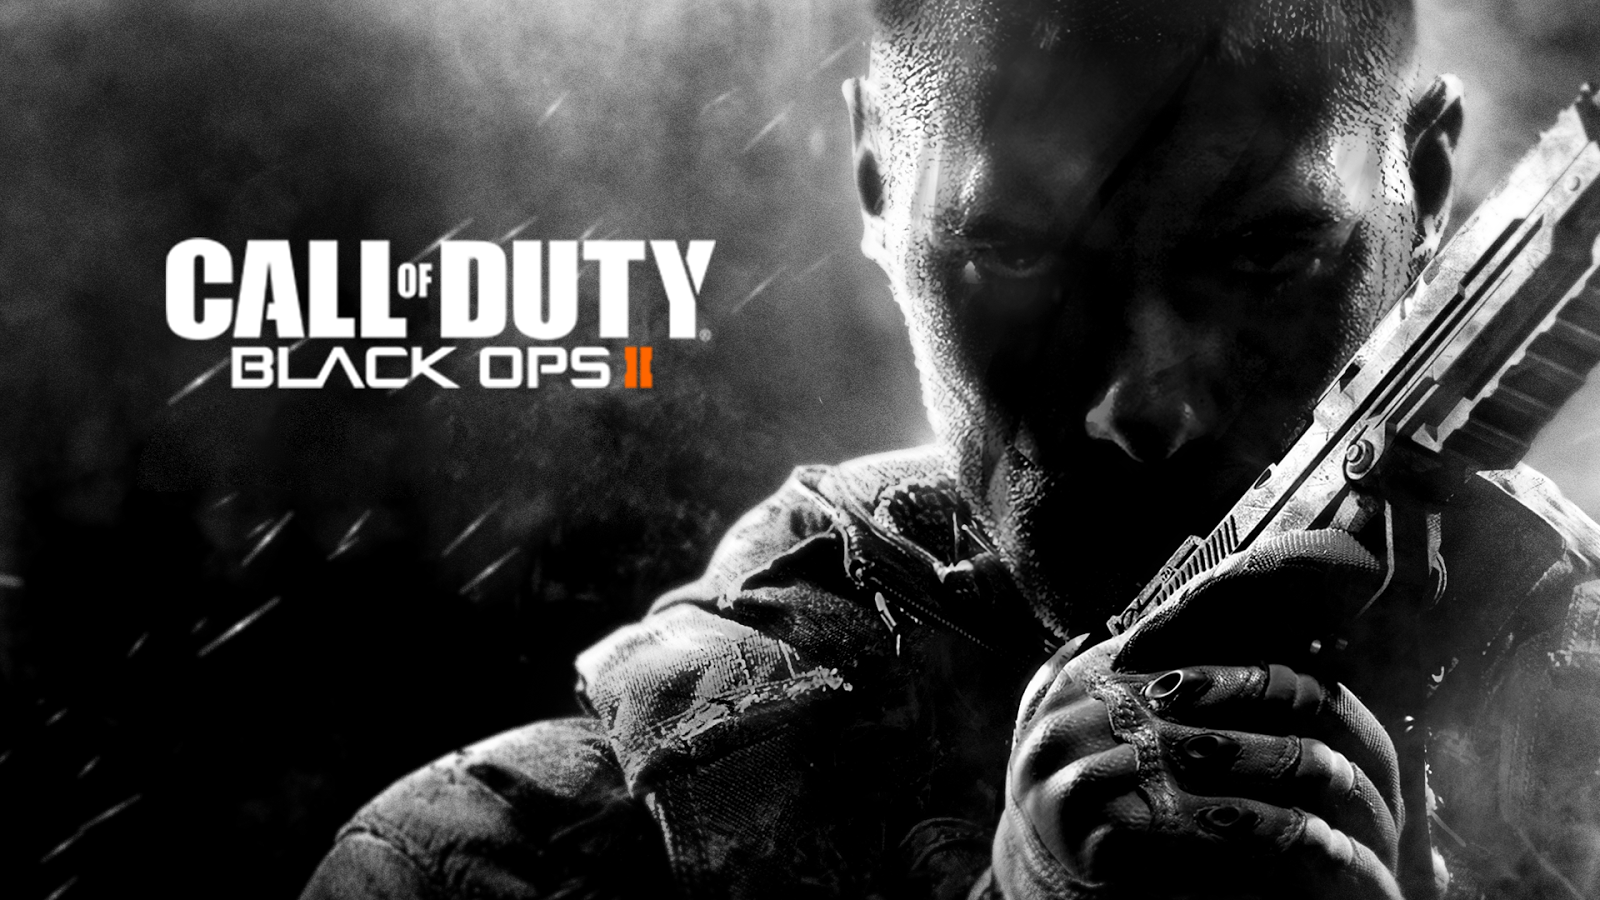 Call Of Duty Black Ops 2 HD Wallpapers   Walls720